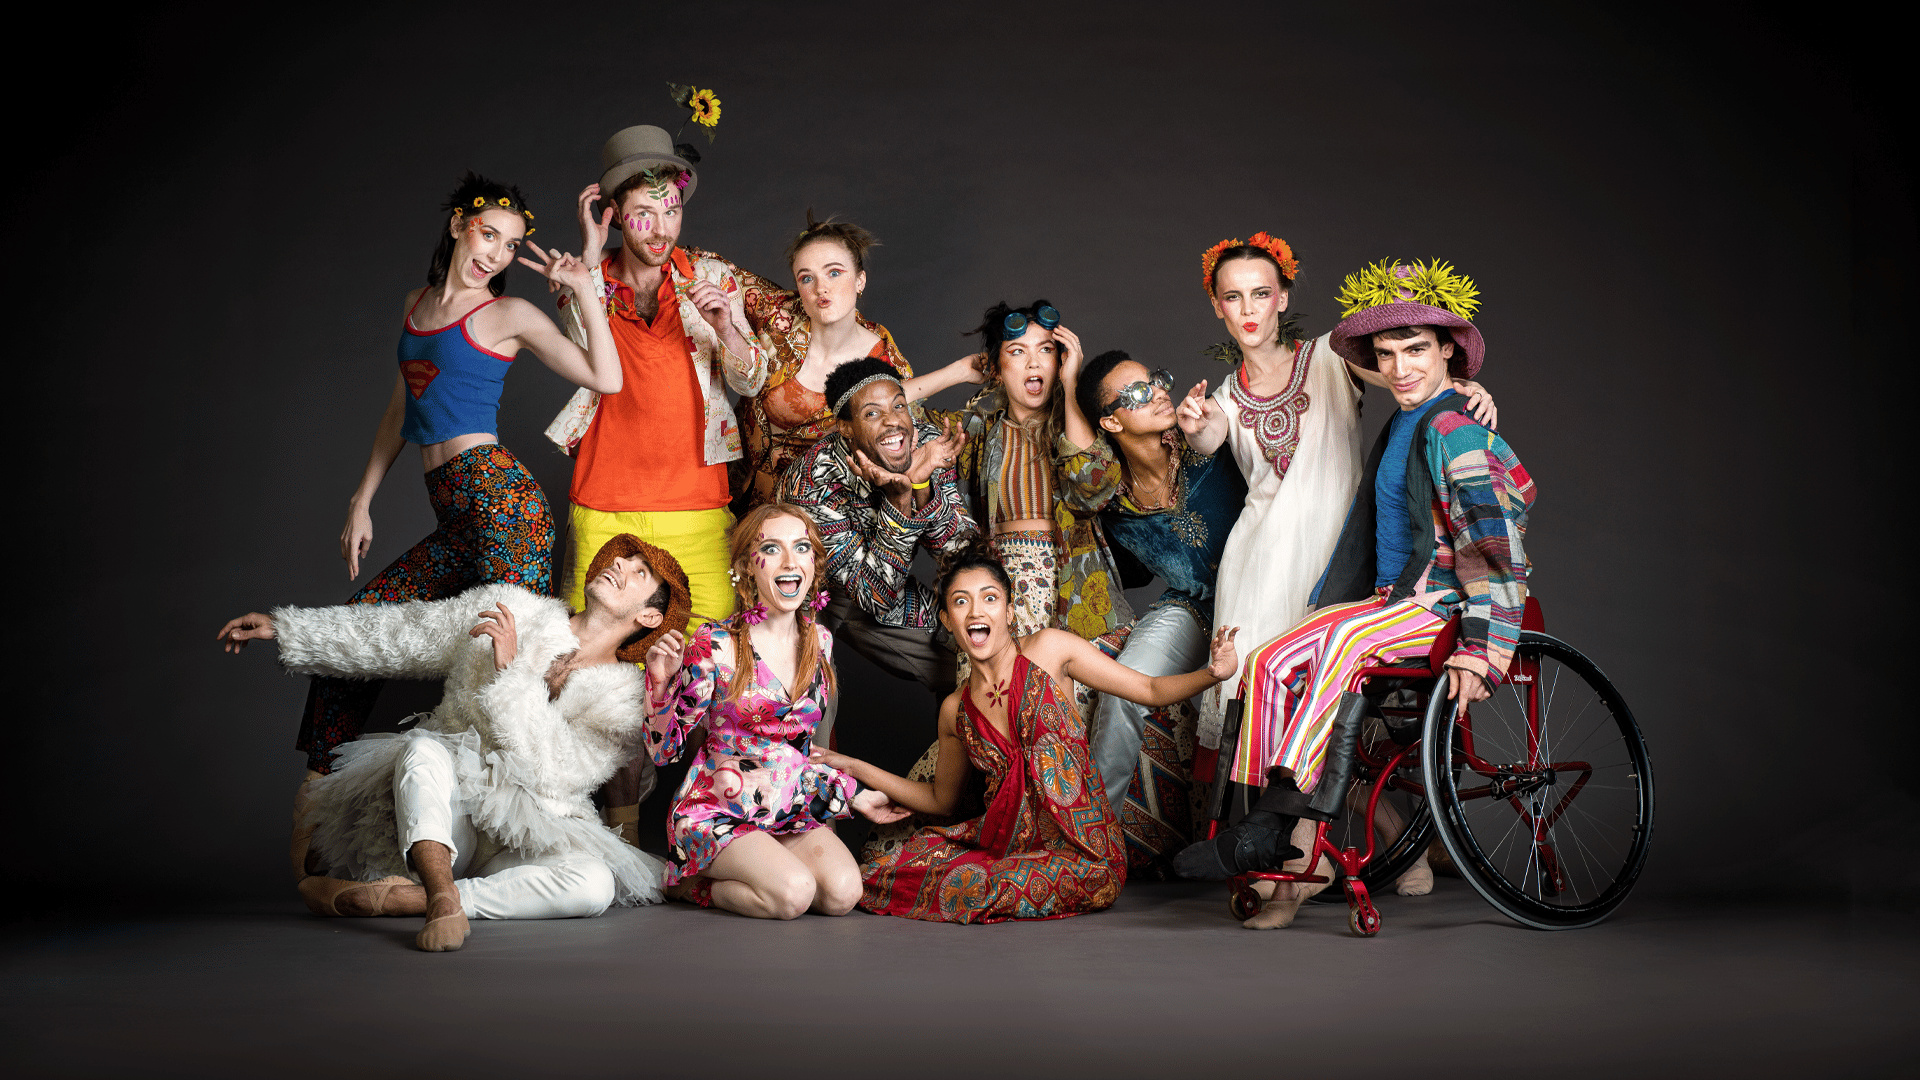 The cast of DREAM grouped together in colourful costumes and posing for the camera